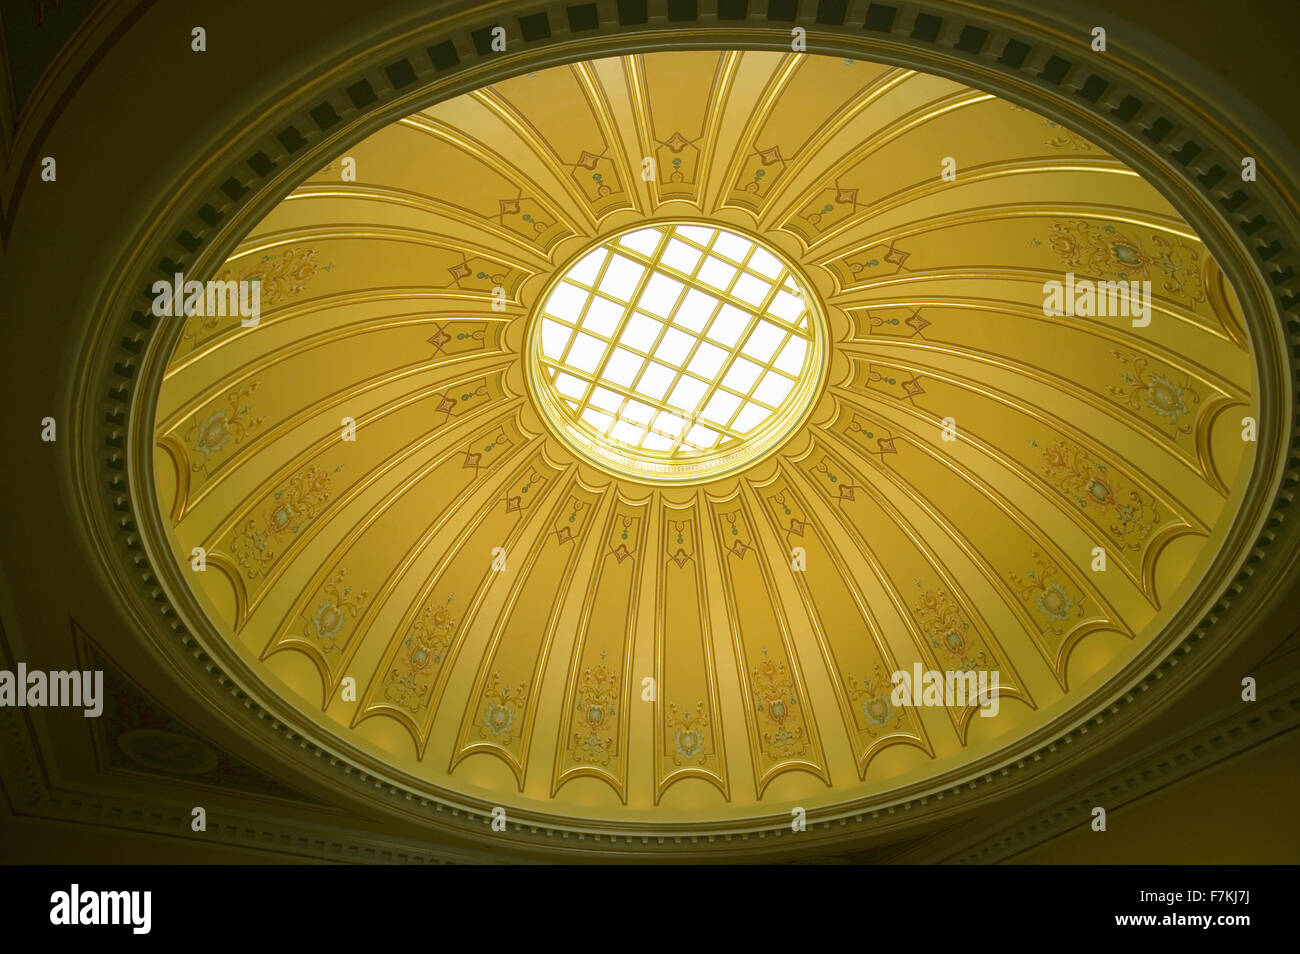 Interior view of dome of Virginia State Capitol, Richmond Virginia Stock Photo